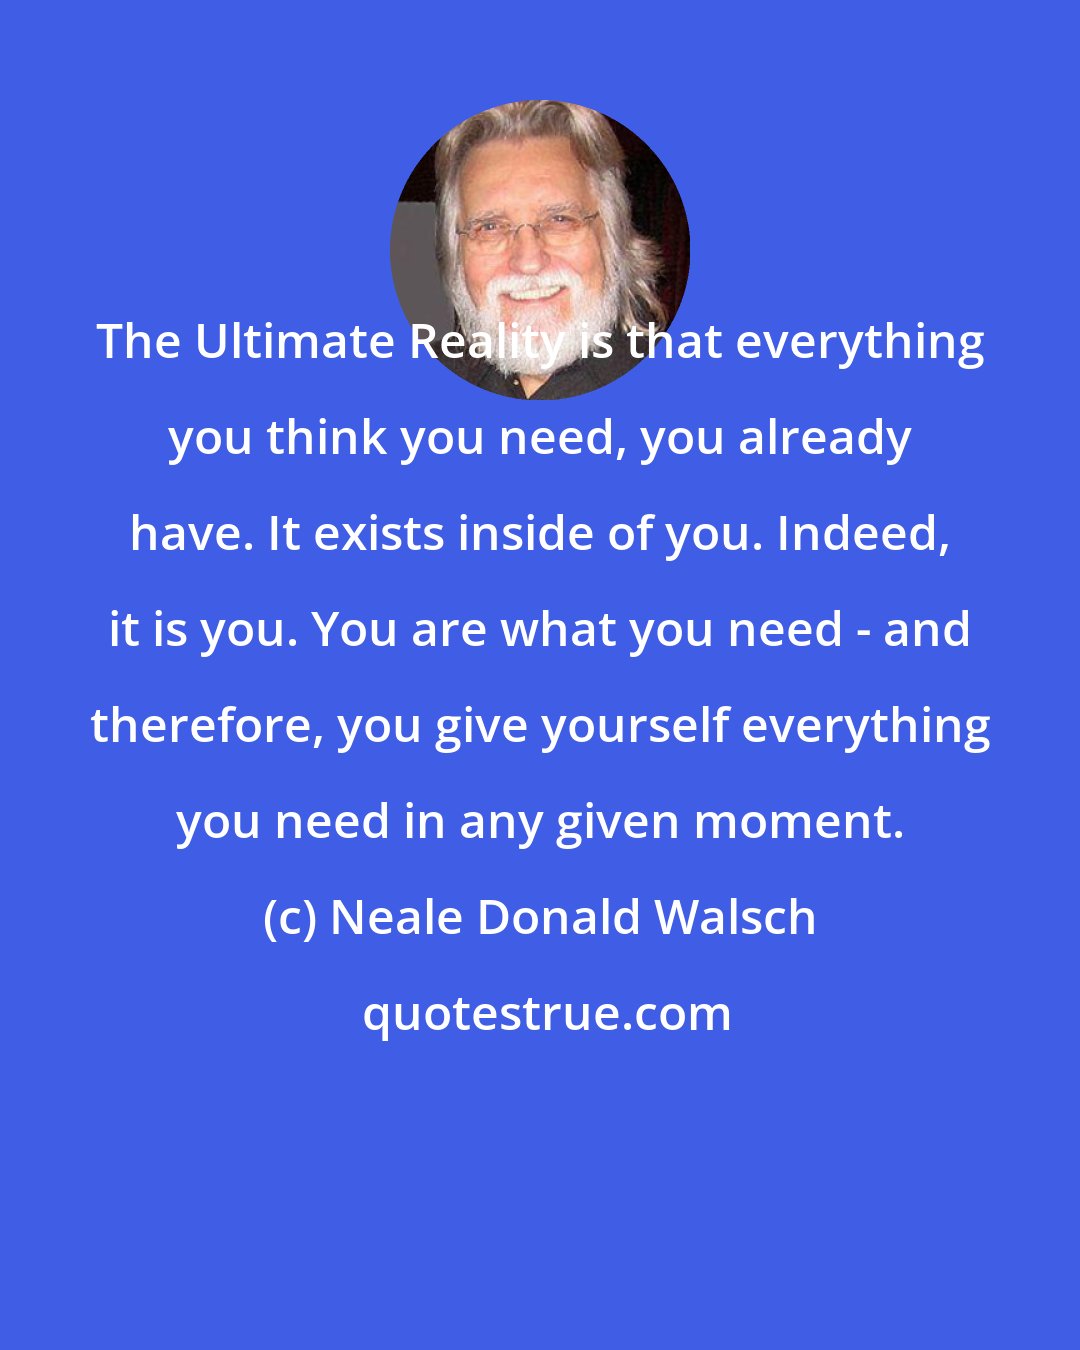 Neale Donald Walsch: The Ultimate Reality is that everything you think you need, you already have. It exists inside of you. Indeed, it is you. You are what you need - and therefore, you give yourself everything you need in any given moment.